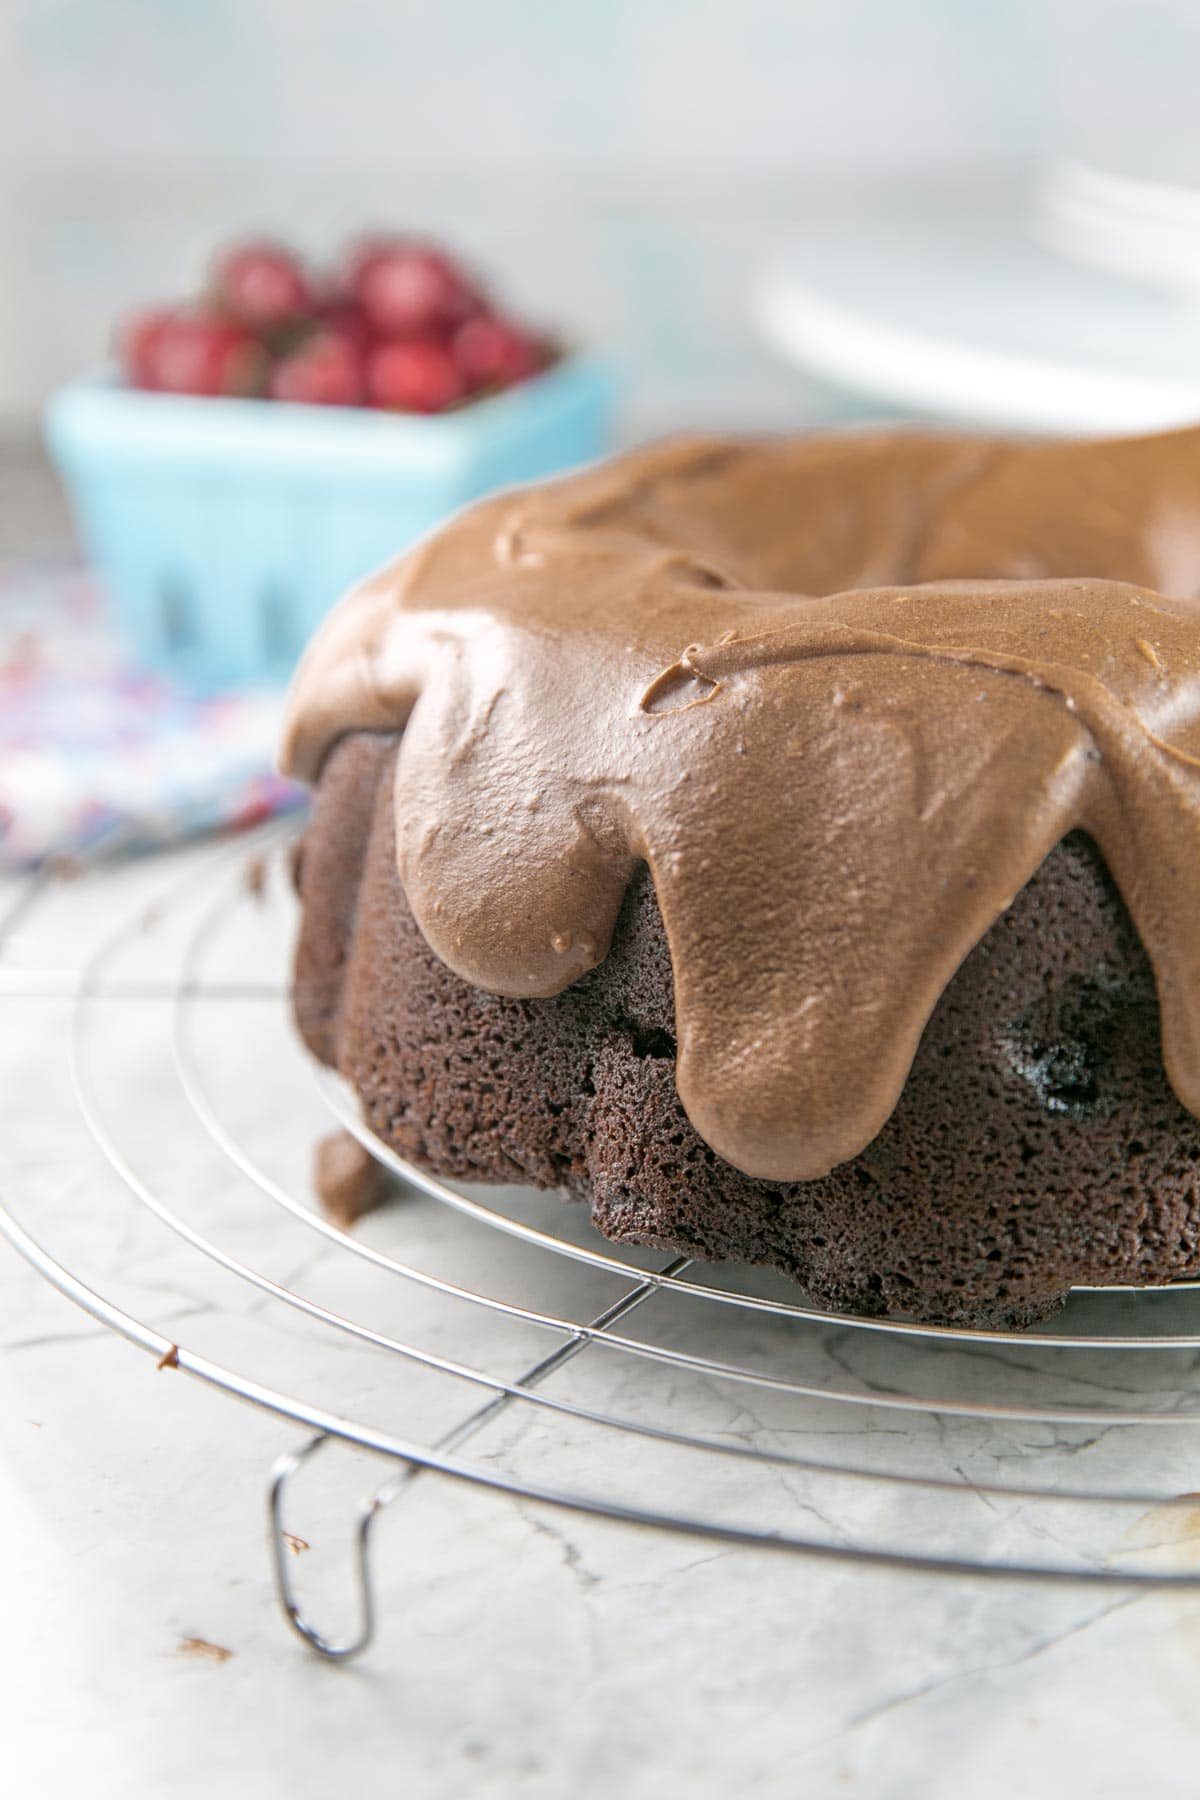 thick chocolate fudge frosting dripping over the sides of a chocolate cherry bundt cake